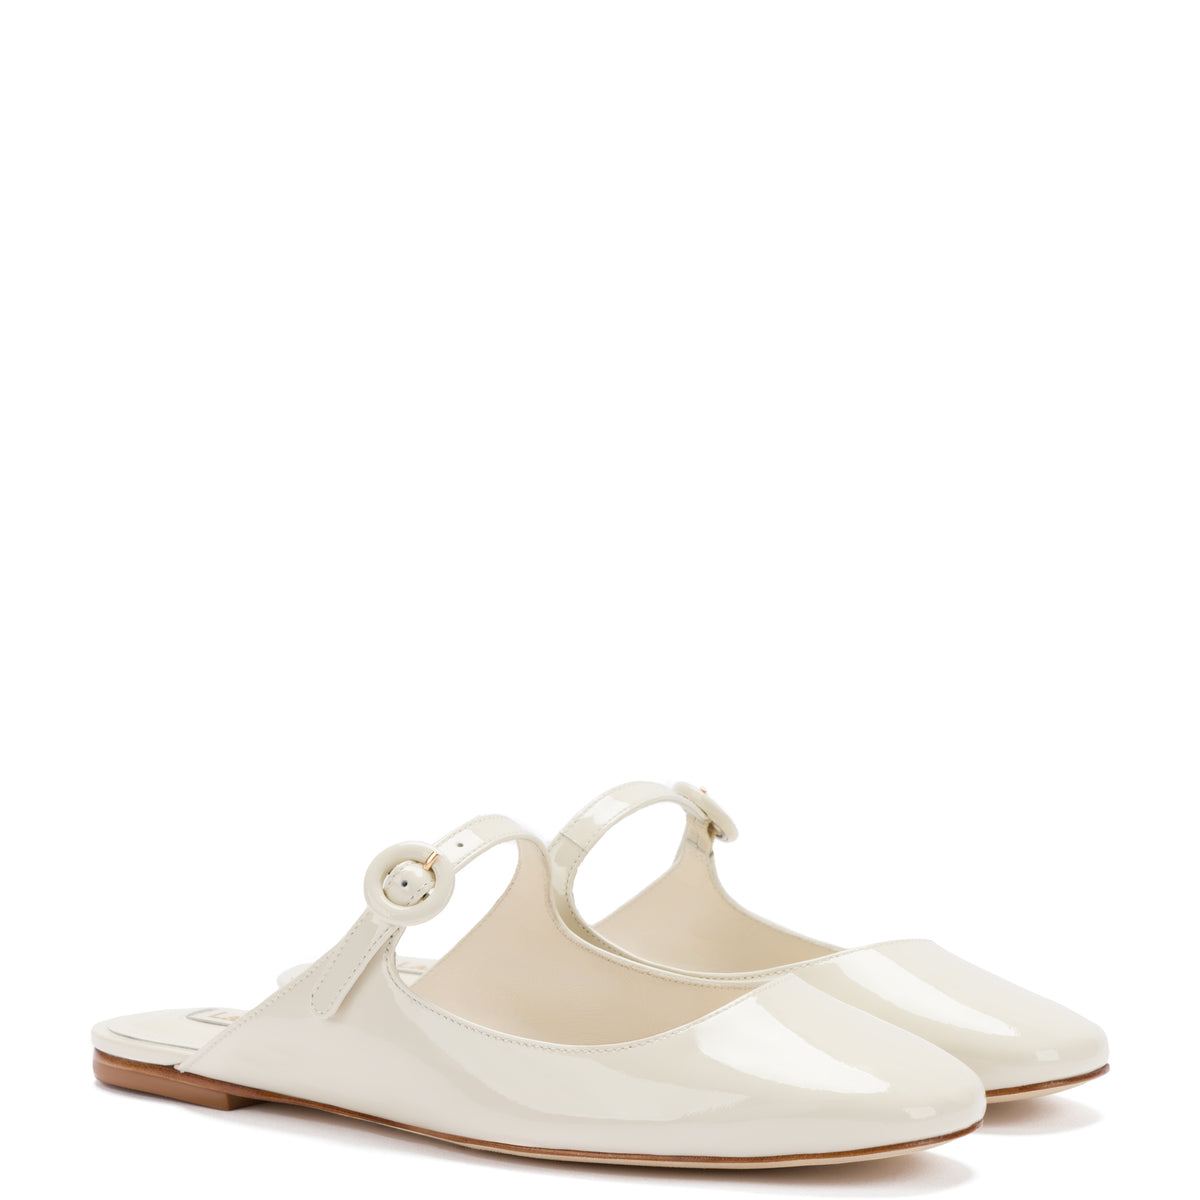 Blair Flat Mule In Ivory Patent Leather